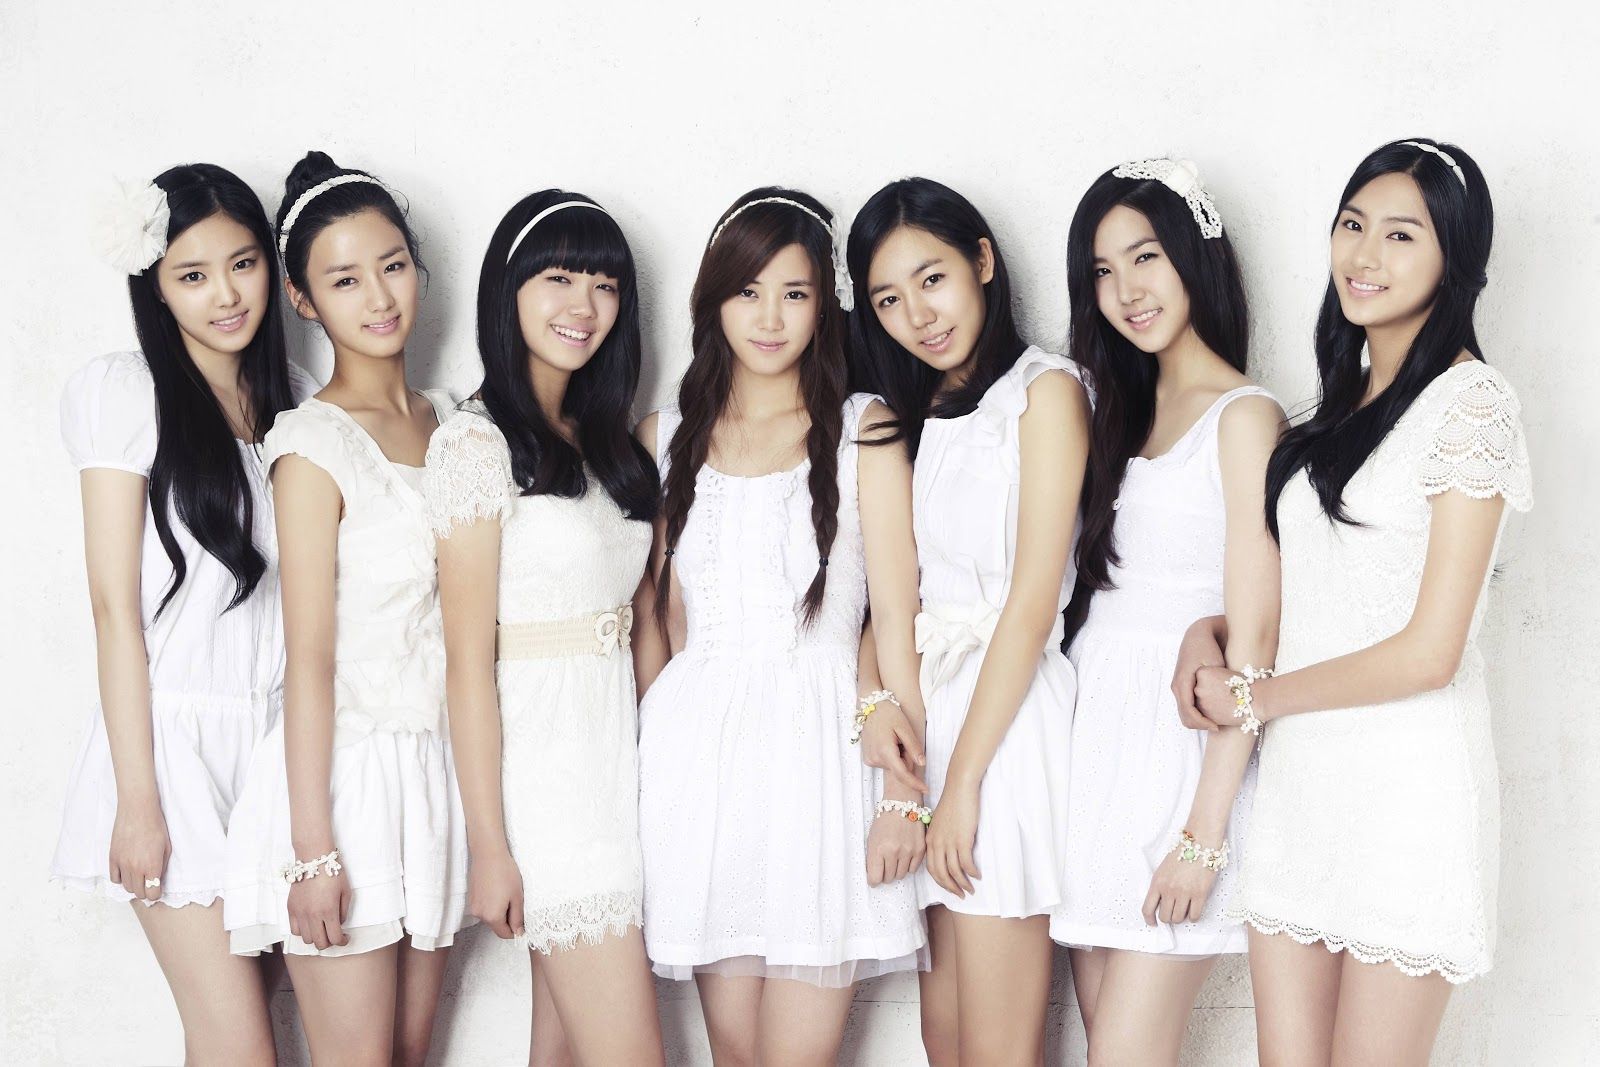 Guess the kpop girl group by picture (slideshow) Quiz